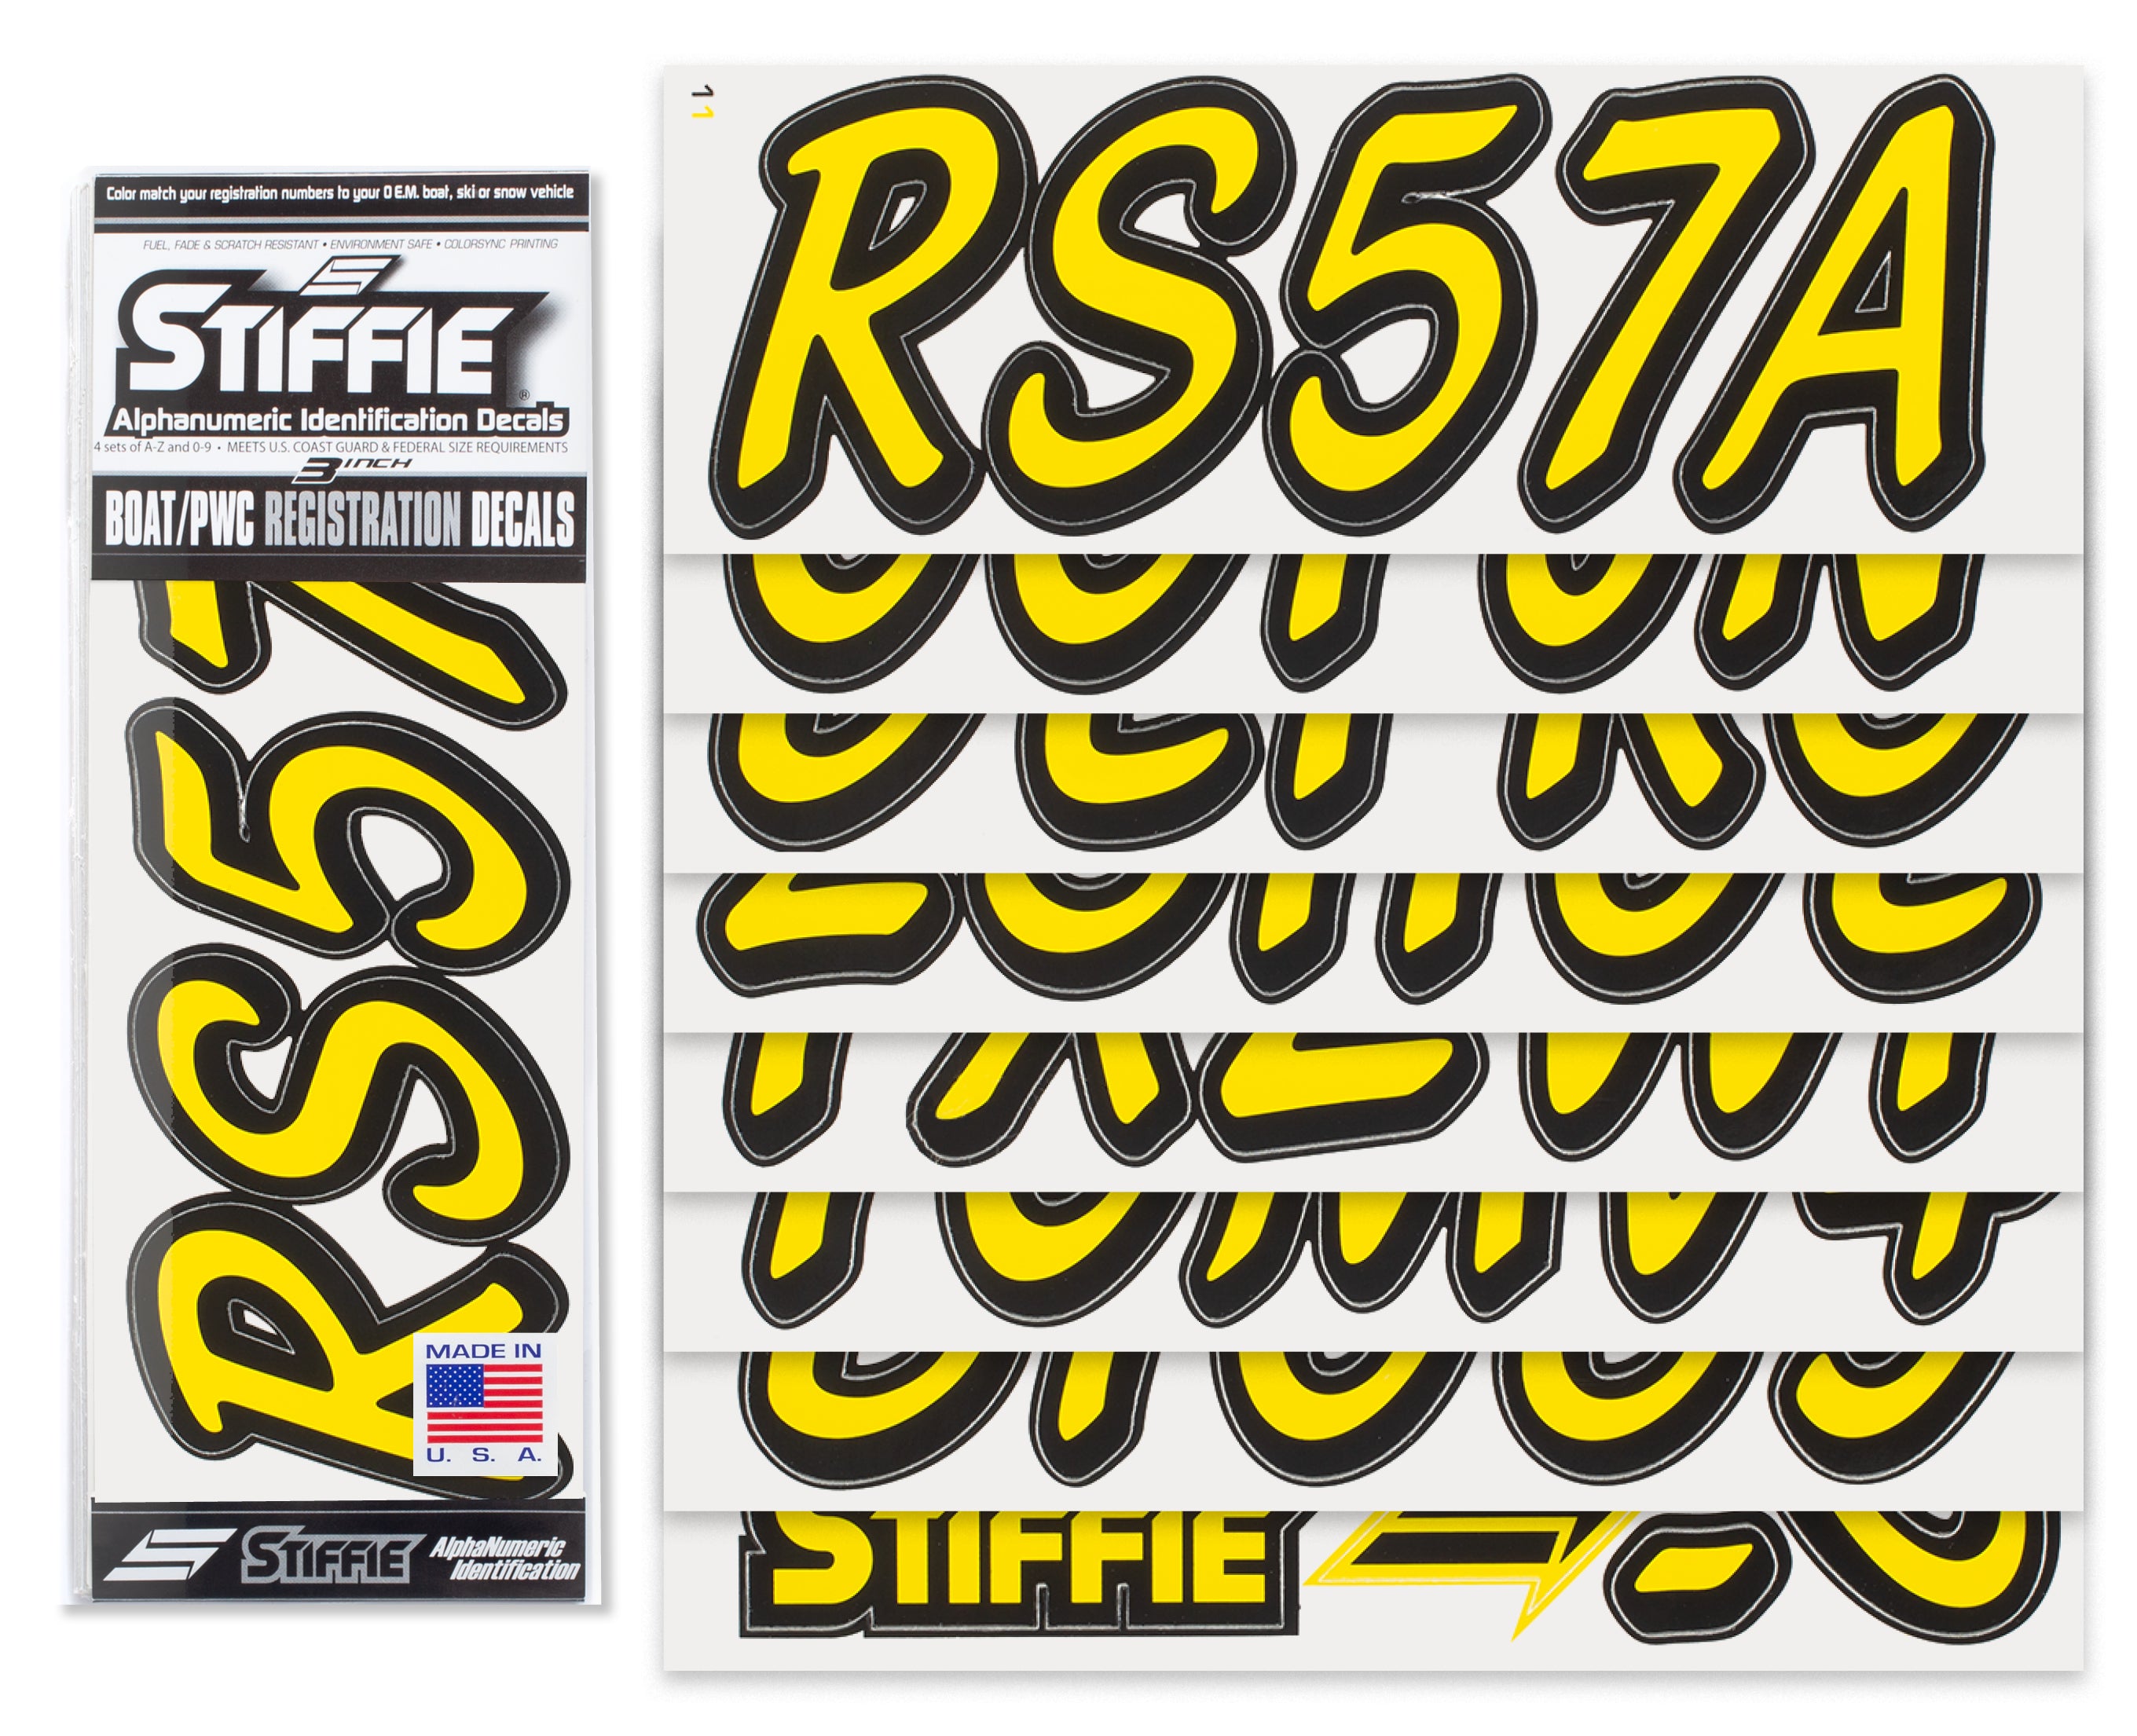 STIFFIE Whipline Solid Electric Yellow/Black 3" Alpha-Numeric Registration Identification Numbers Stickers Decals for Boats & Personal Watercraft